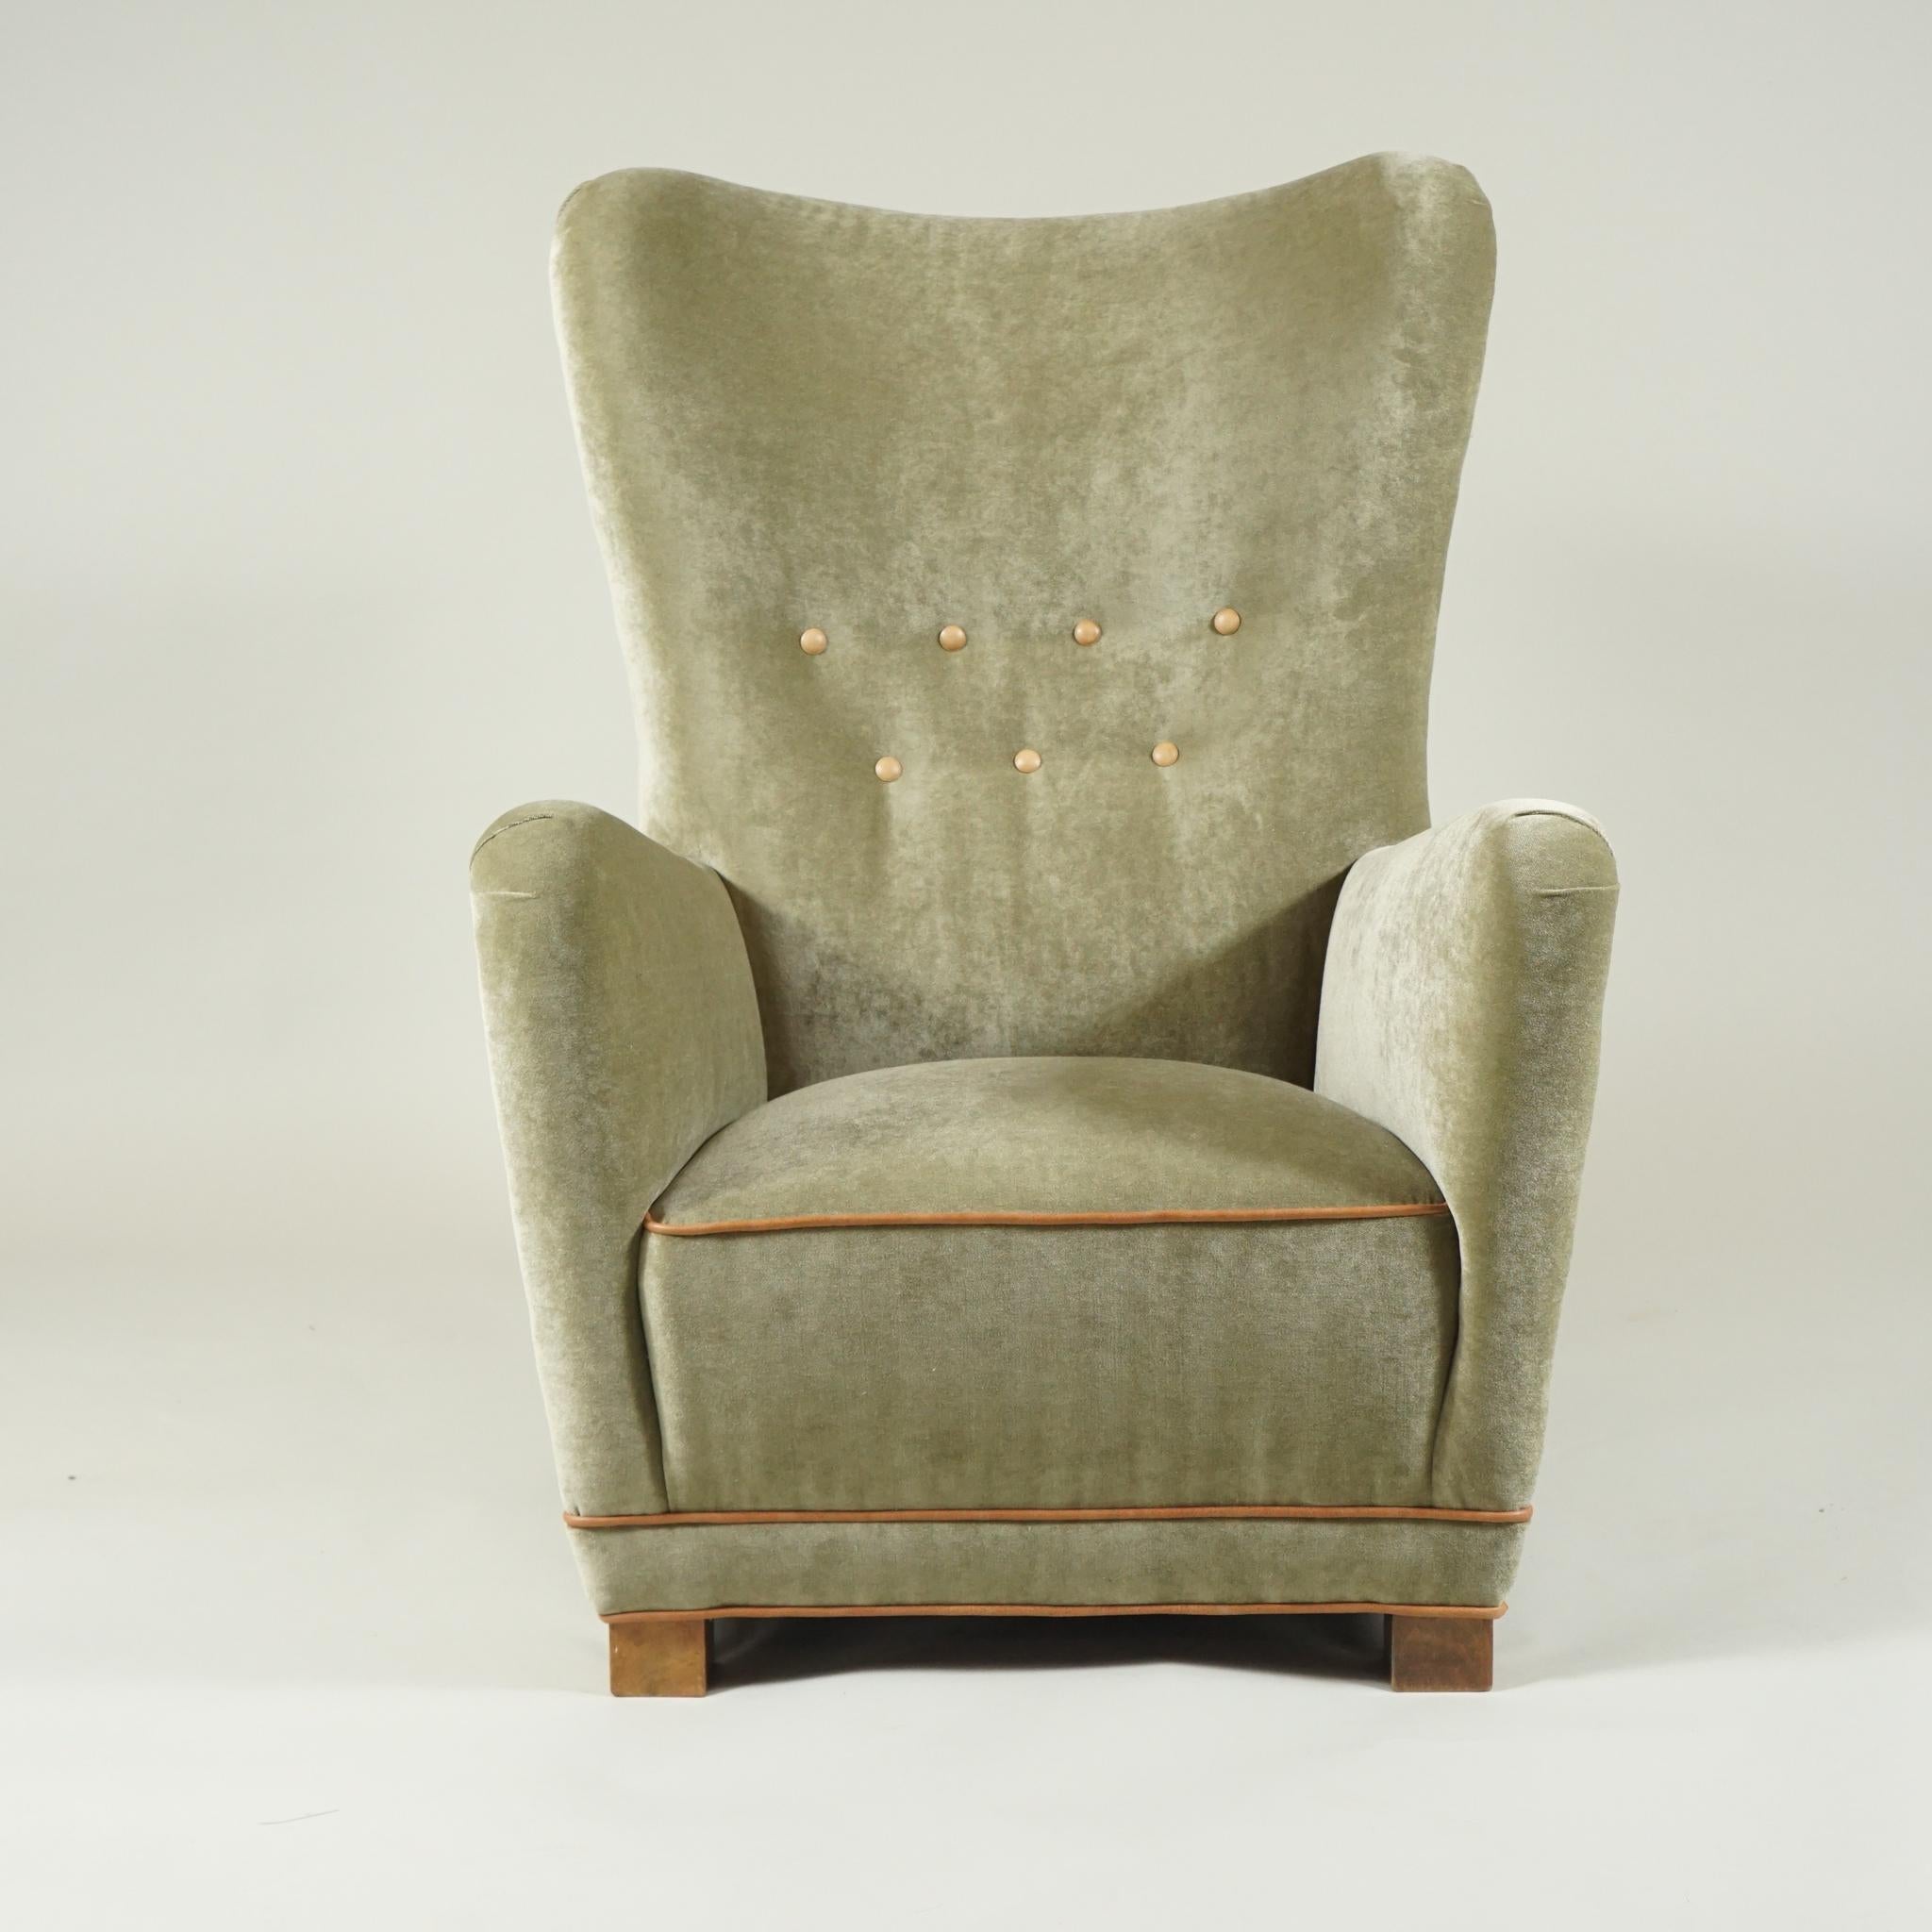 A pair of high-backed Fritz Hansen armchairs of great form newly recovered in a soft green mohair fabric,
from 1930s, Denmark.